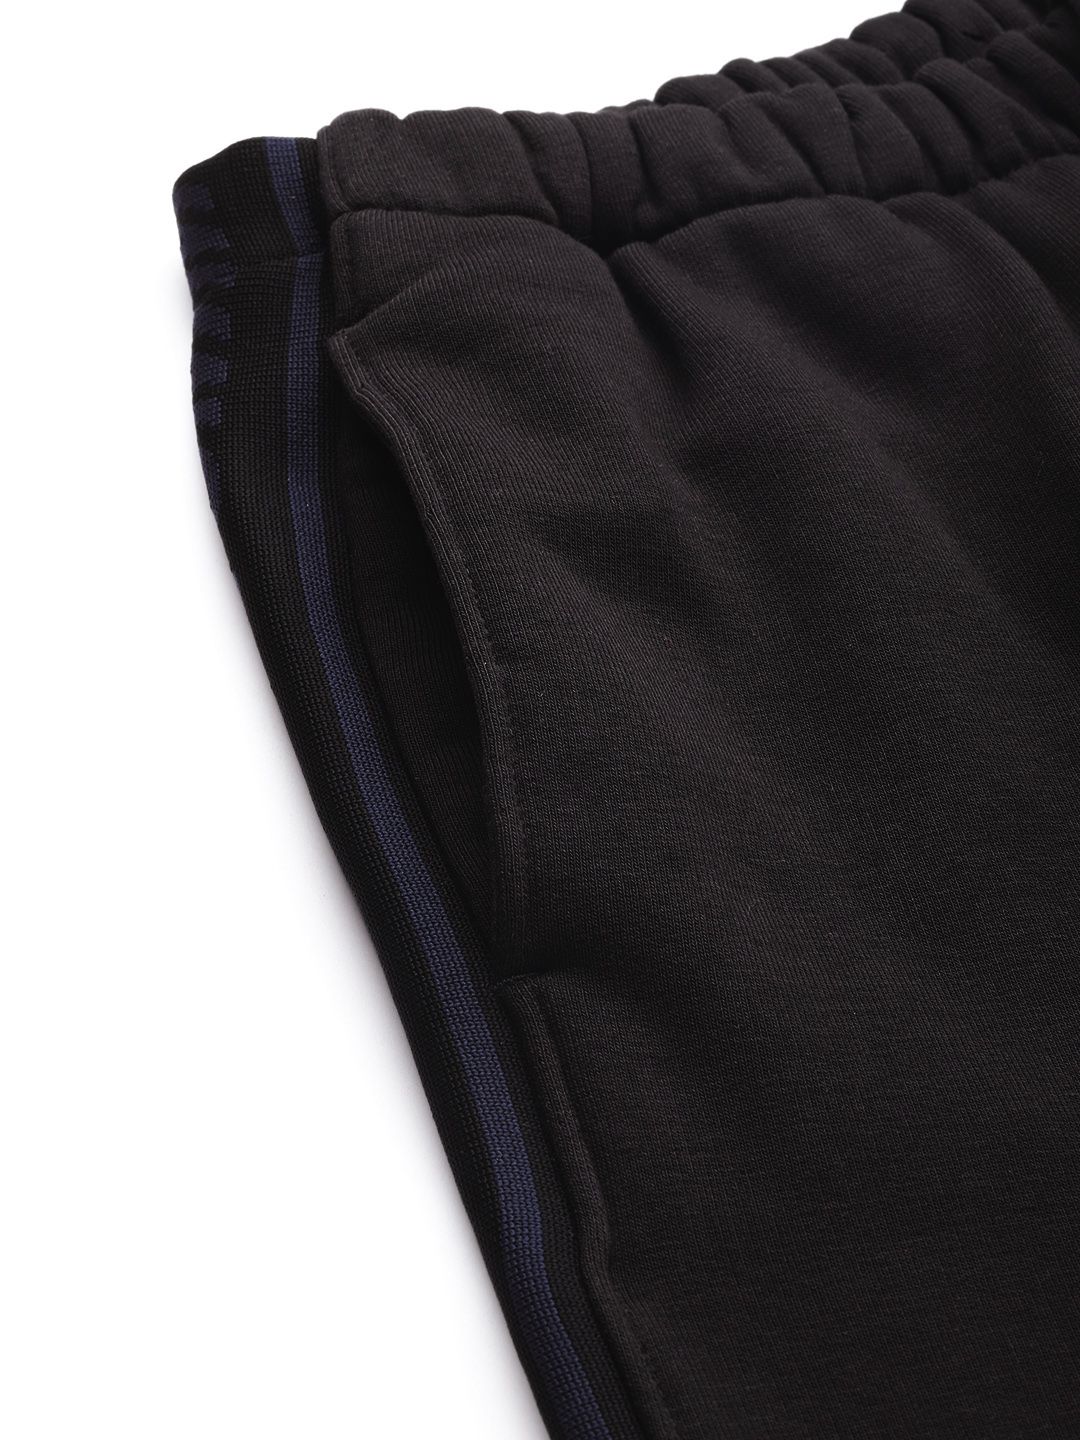 Buy Griffel GRIFFEL Women Black Solid Cotton Track Pants at Redfynd